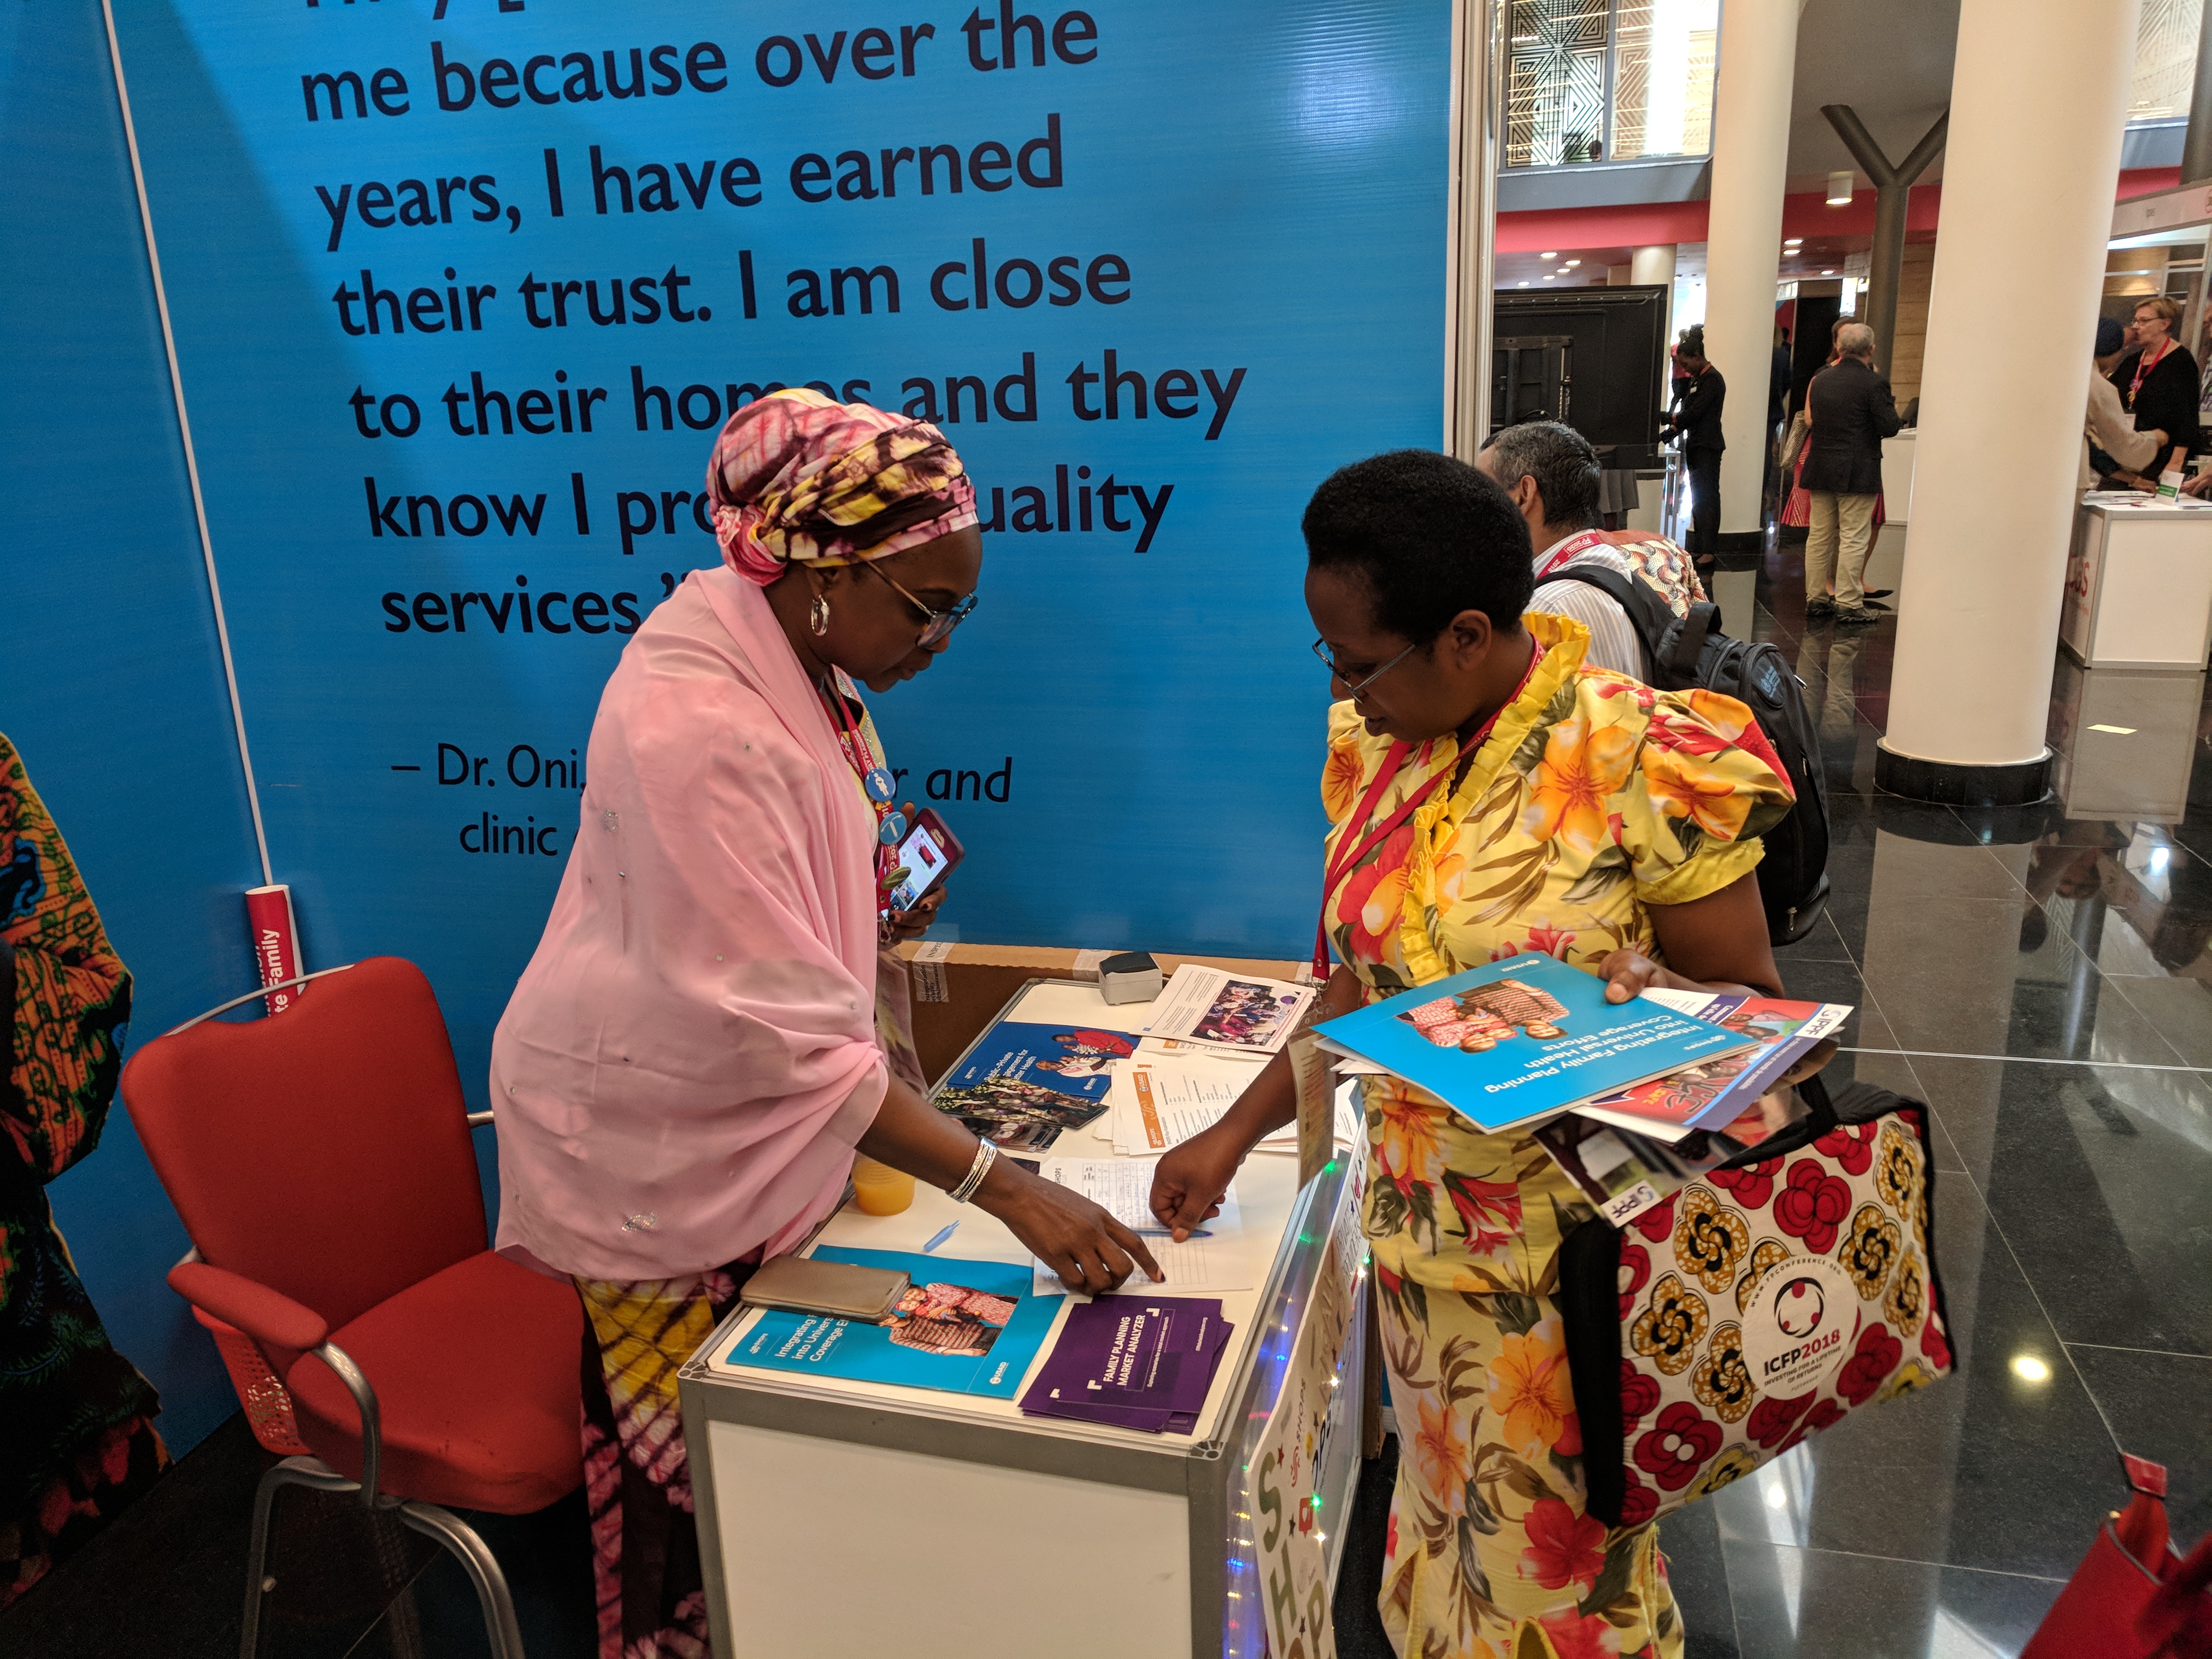 Amina talking to a visitor at the booth